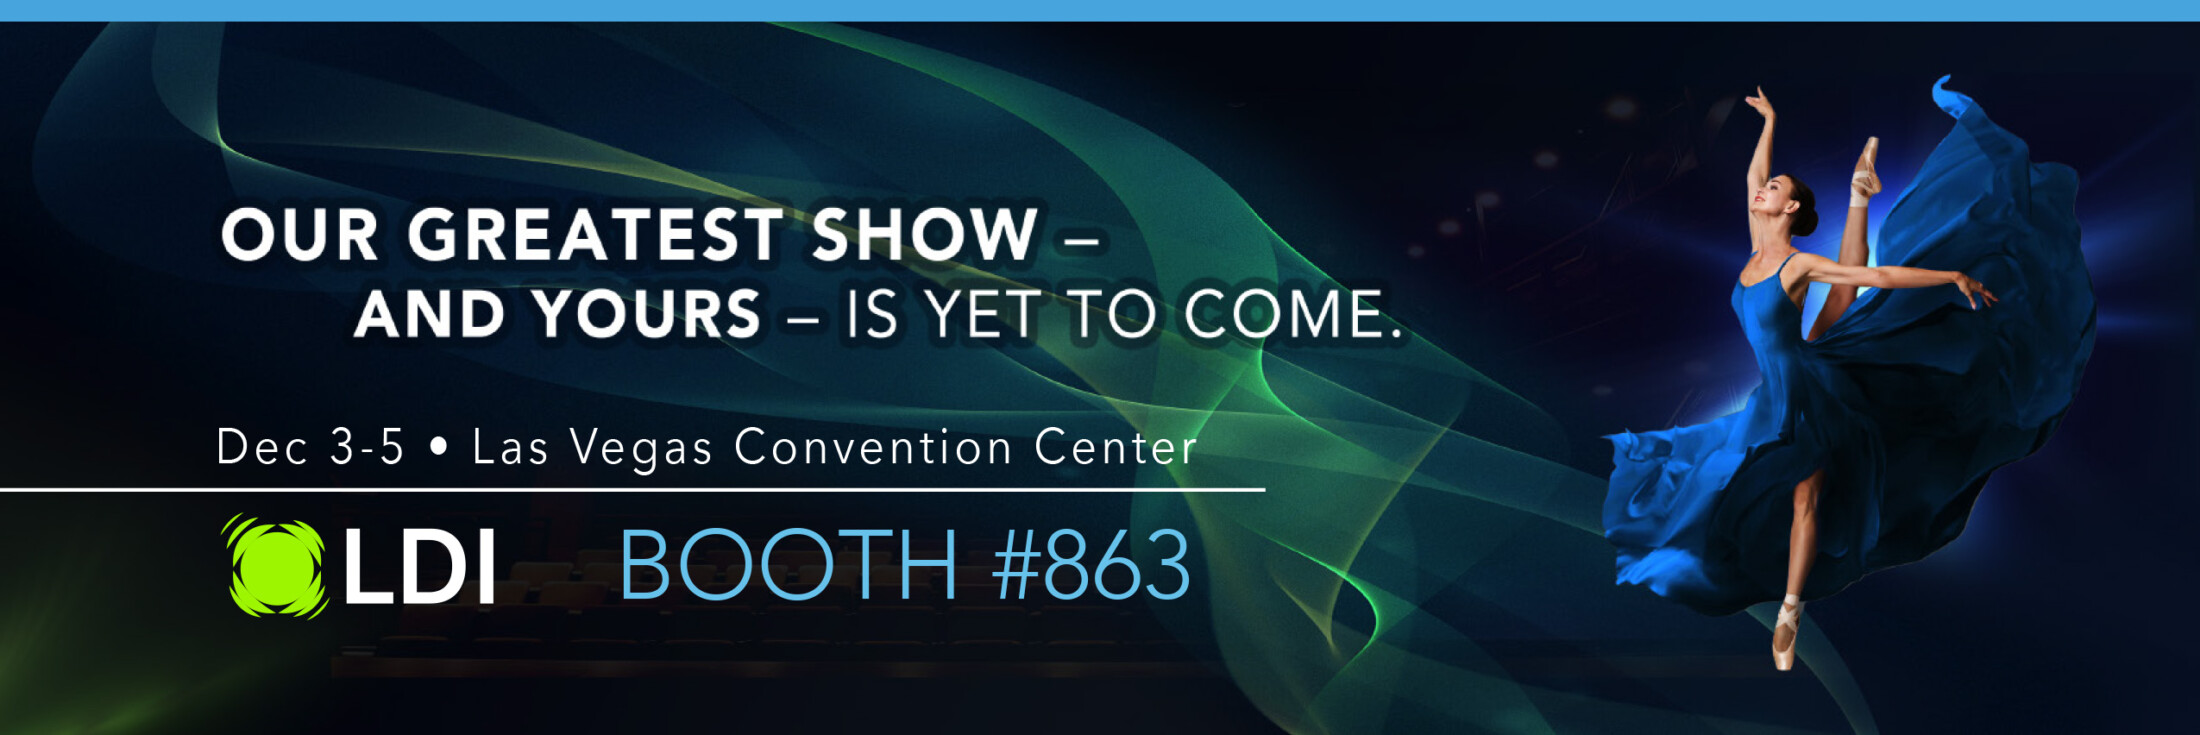 Our greatest show - and yours - is yet to come | December 3-5 | Las Vegas Convention Center